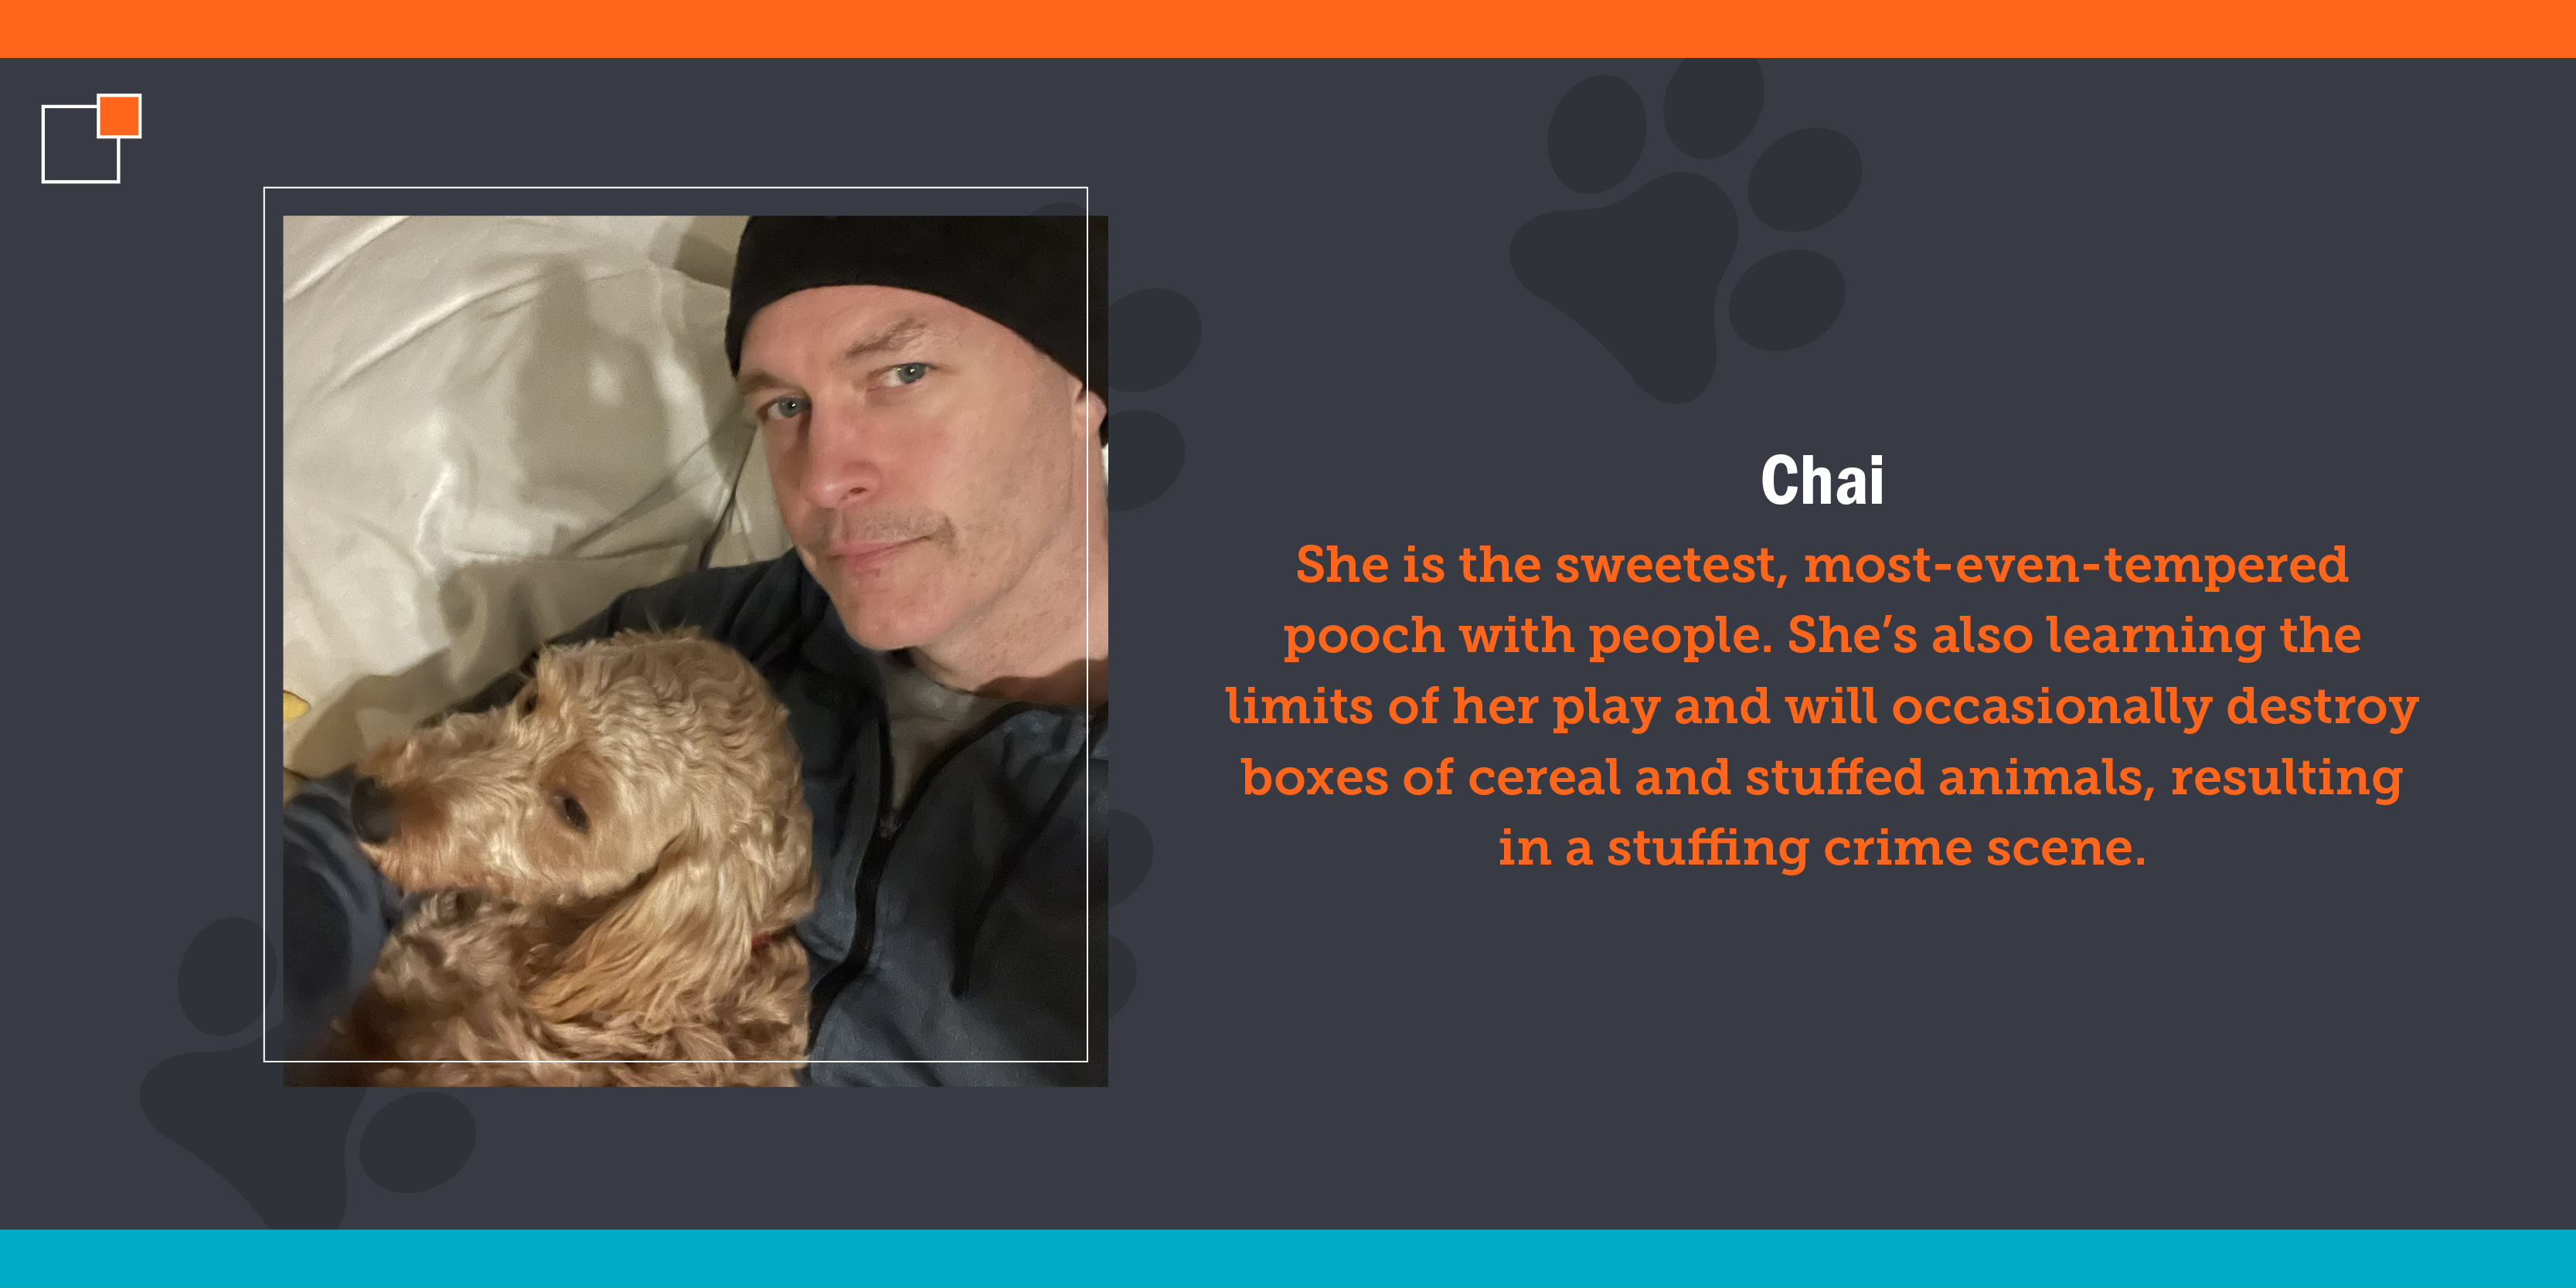 One dog named Chai, a 30-pound golden doodle rescued in December of 2022 by way of a Kentucky puppy mill. She is the sweetest, most-even-tempered pooch with people. She’s also learning the limits of her play and will occasionally destroy boxes of cereal and stuffed animals, resulting in a stuffing crime scene.